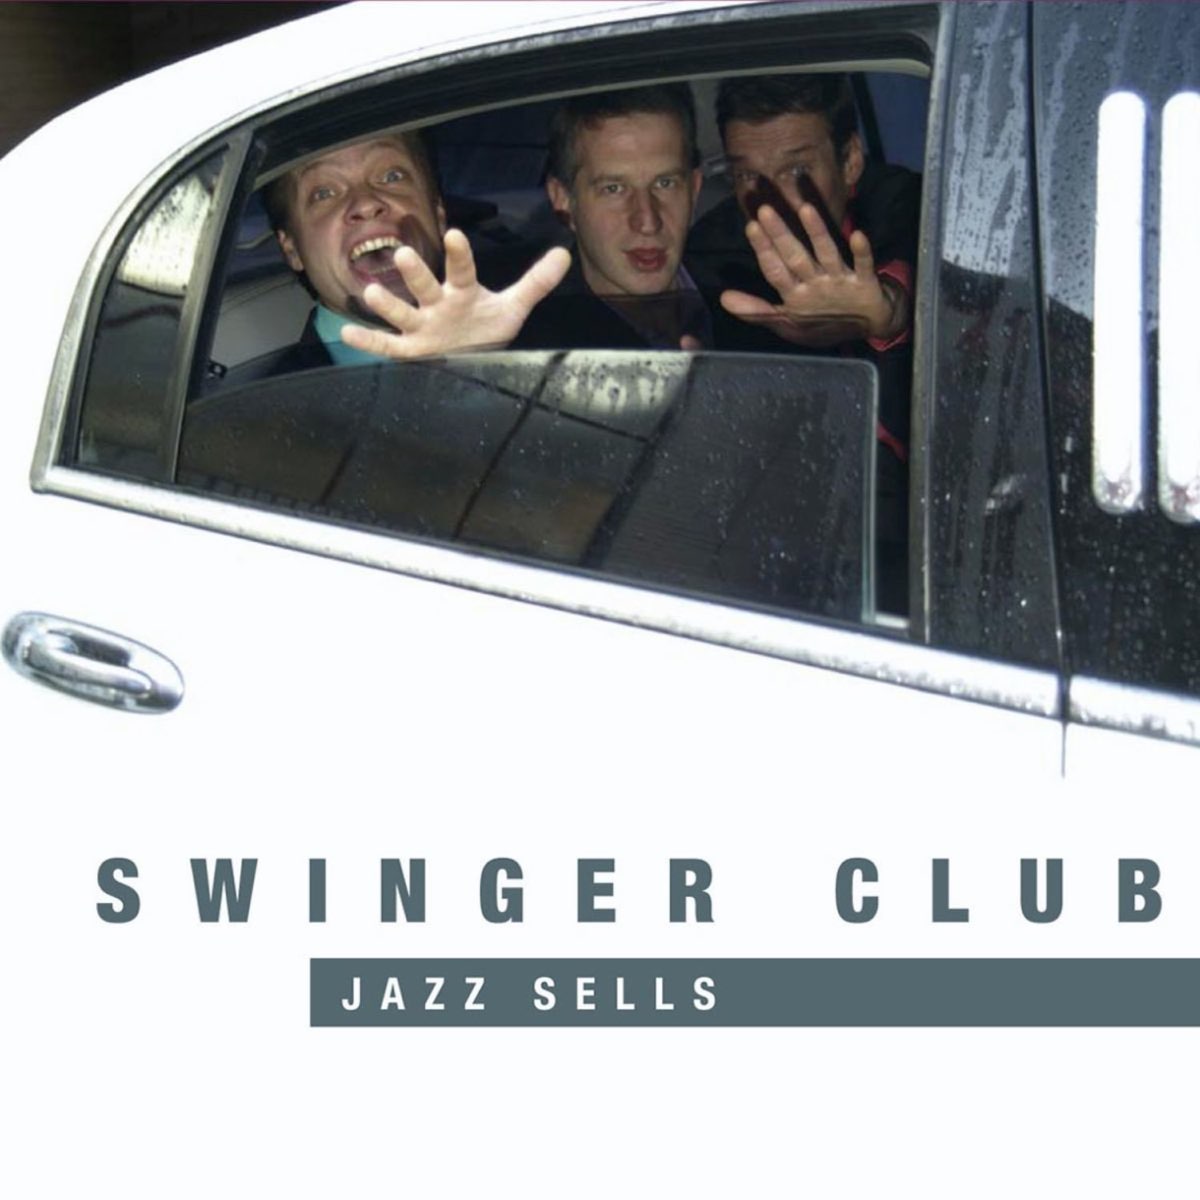 Jazz Sells by Swinger Club on Apple Music picture